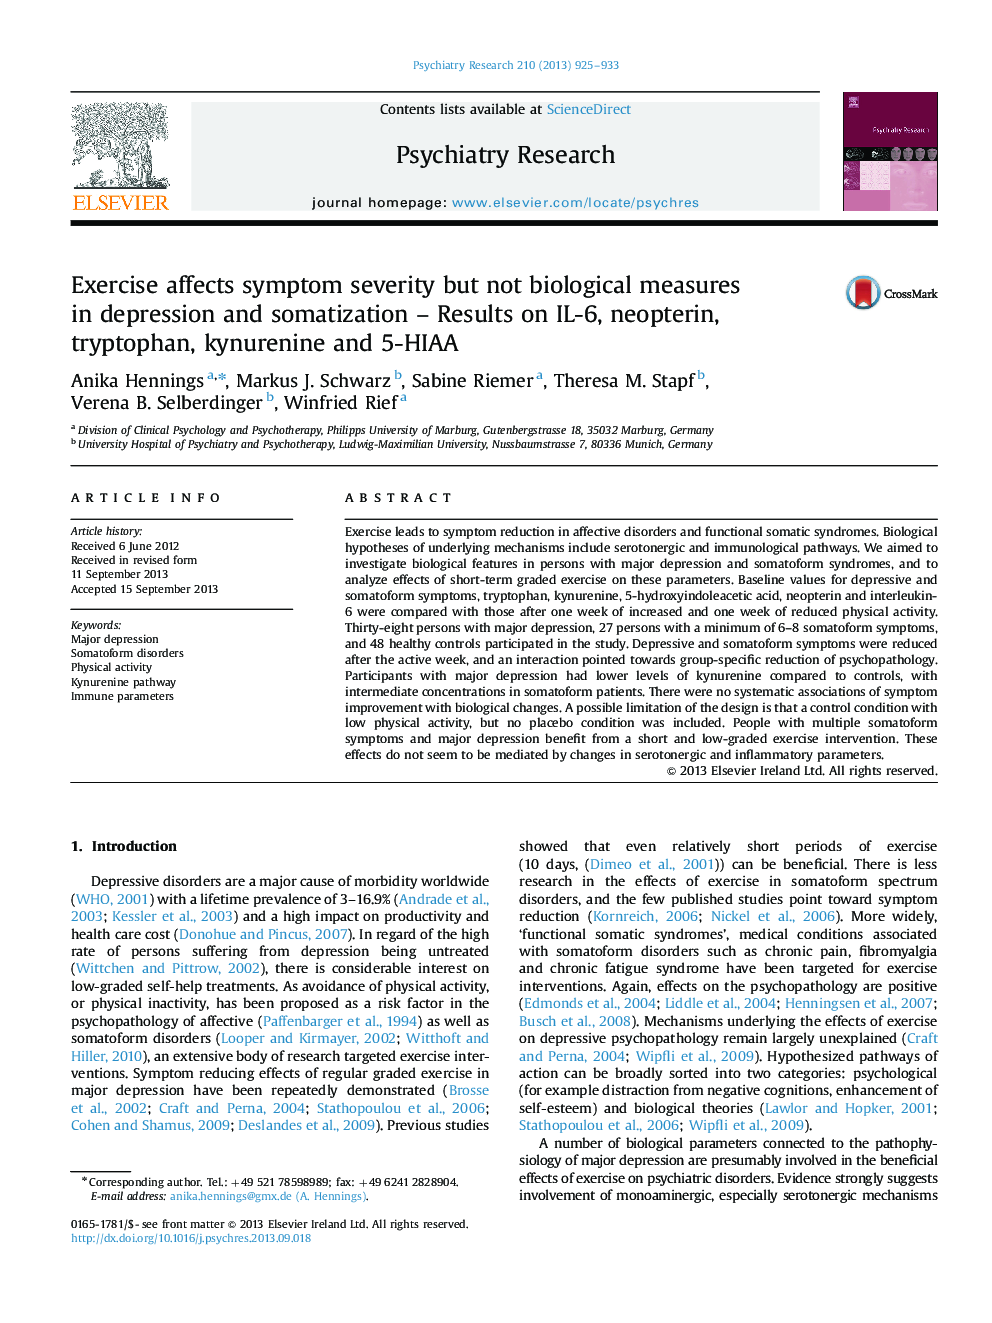 Exercise affects symptom severity but not biological measures in depression and somatization - Results on IL-6, neopterin, tryptophan, kynurenine and 5-HIAA